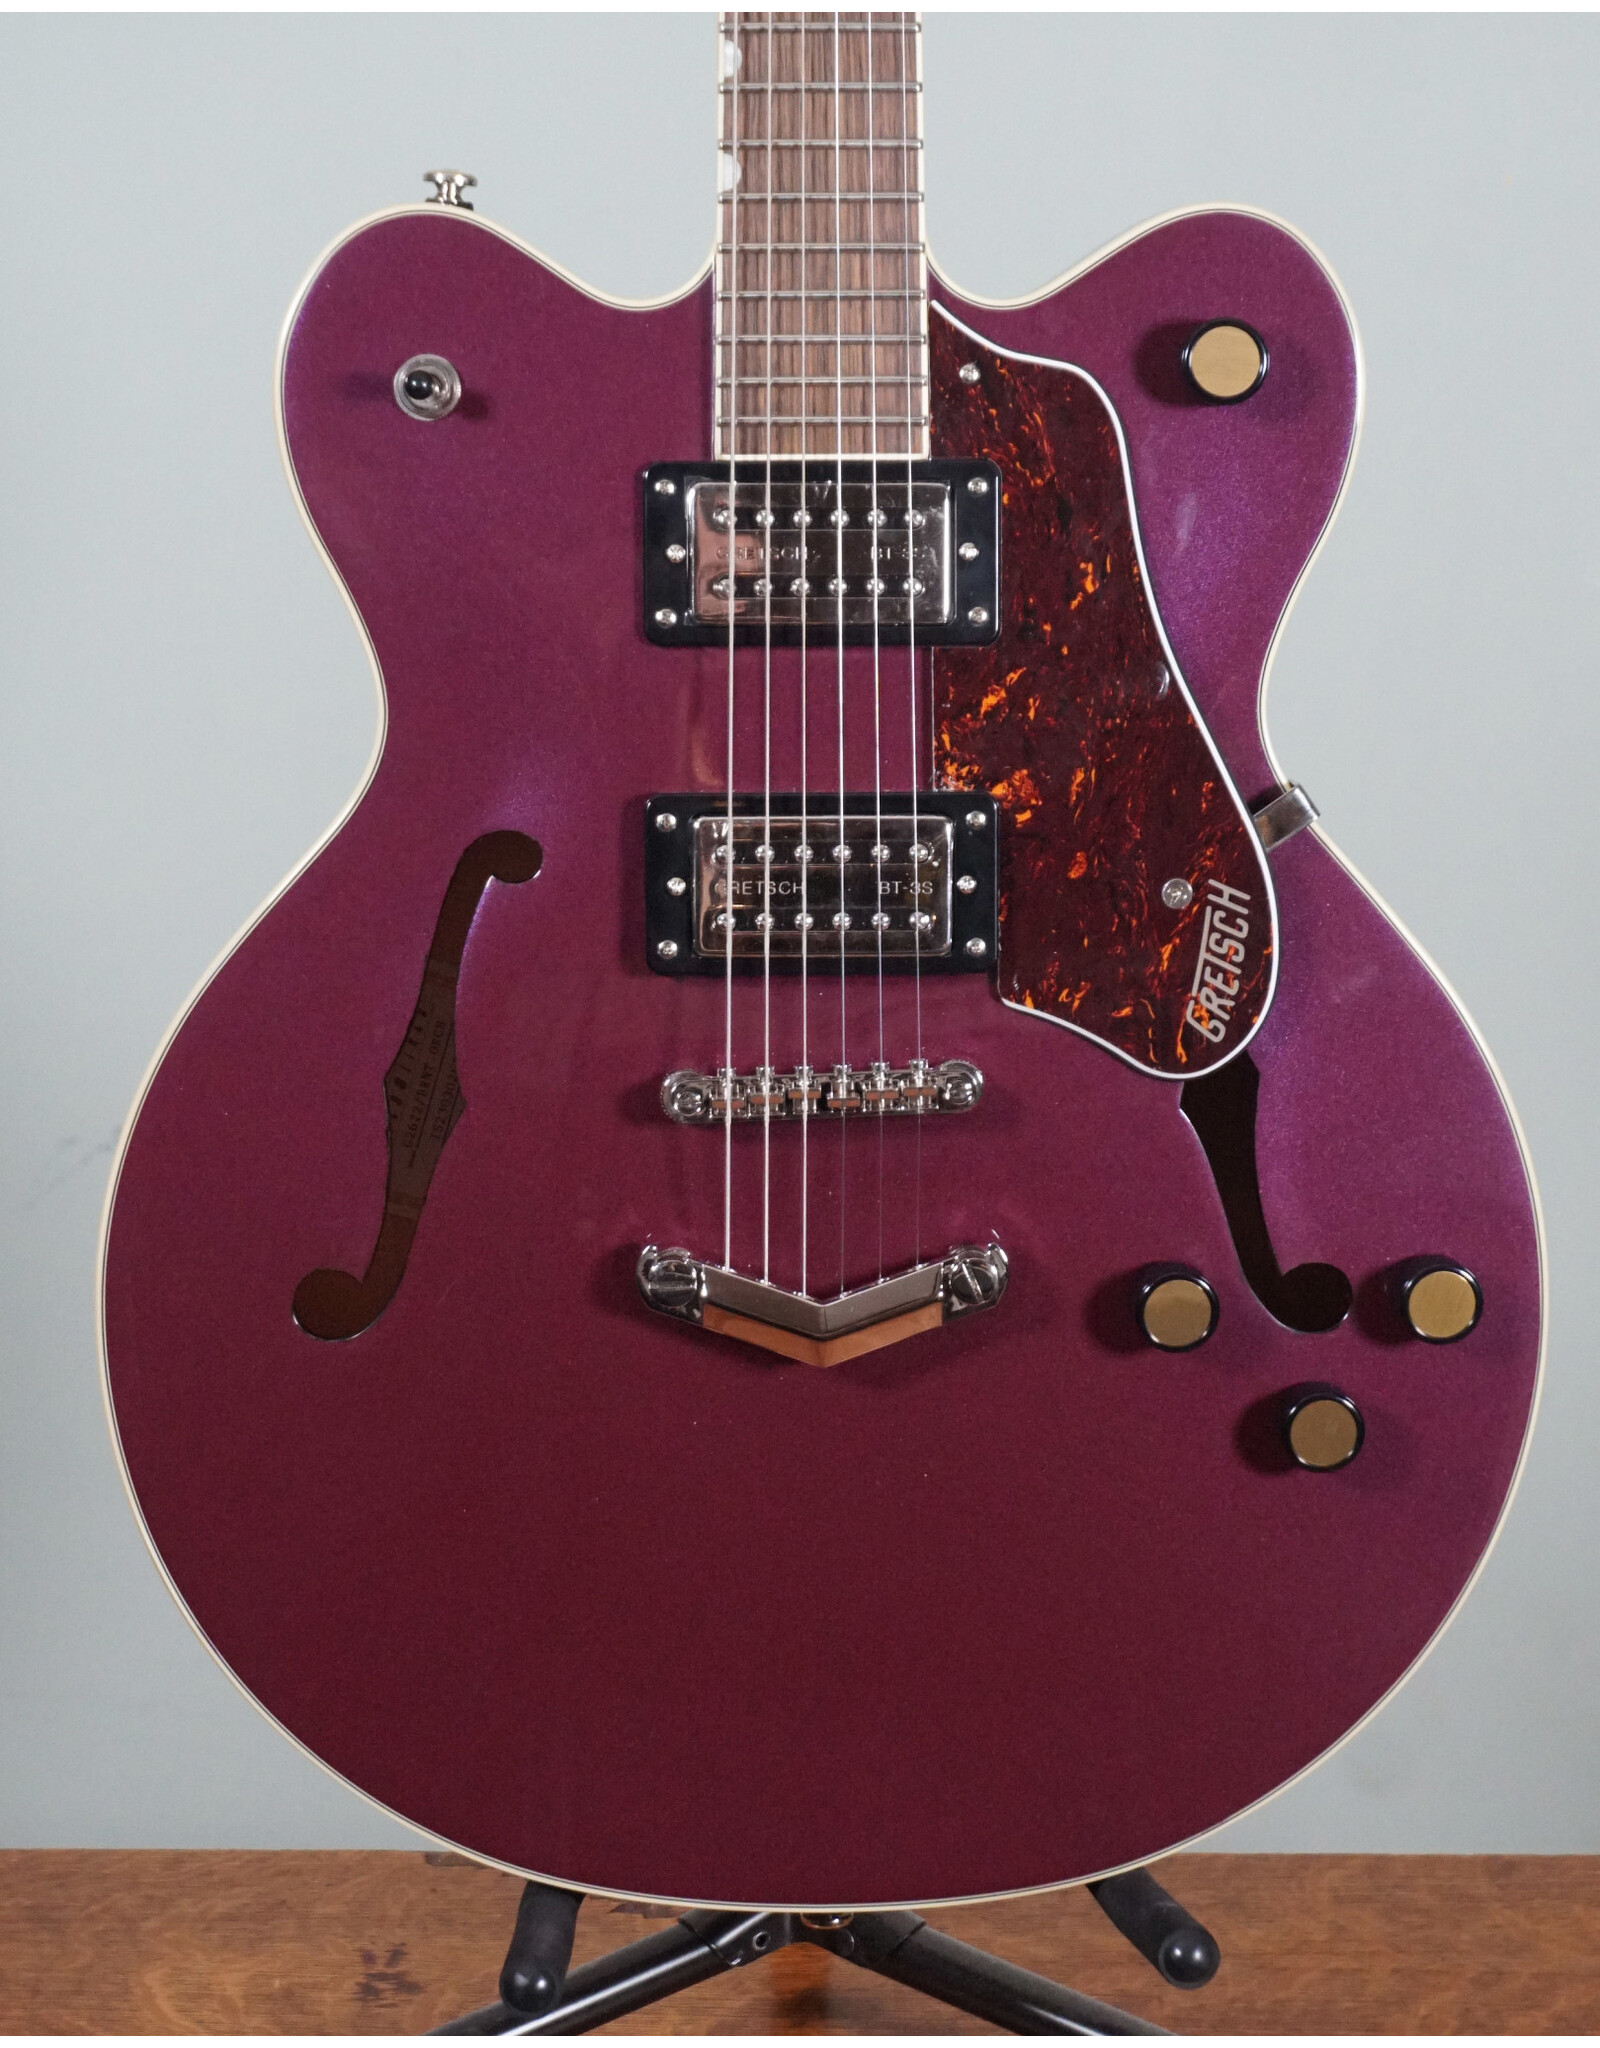 Gretsch Gretsch G2622 Streamliner Center Block Double-Cut with V-Stoptail, Broad’Tron BT-3S Pickups, Burnt Orchid